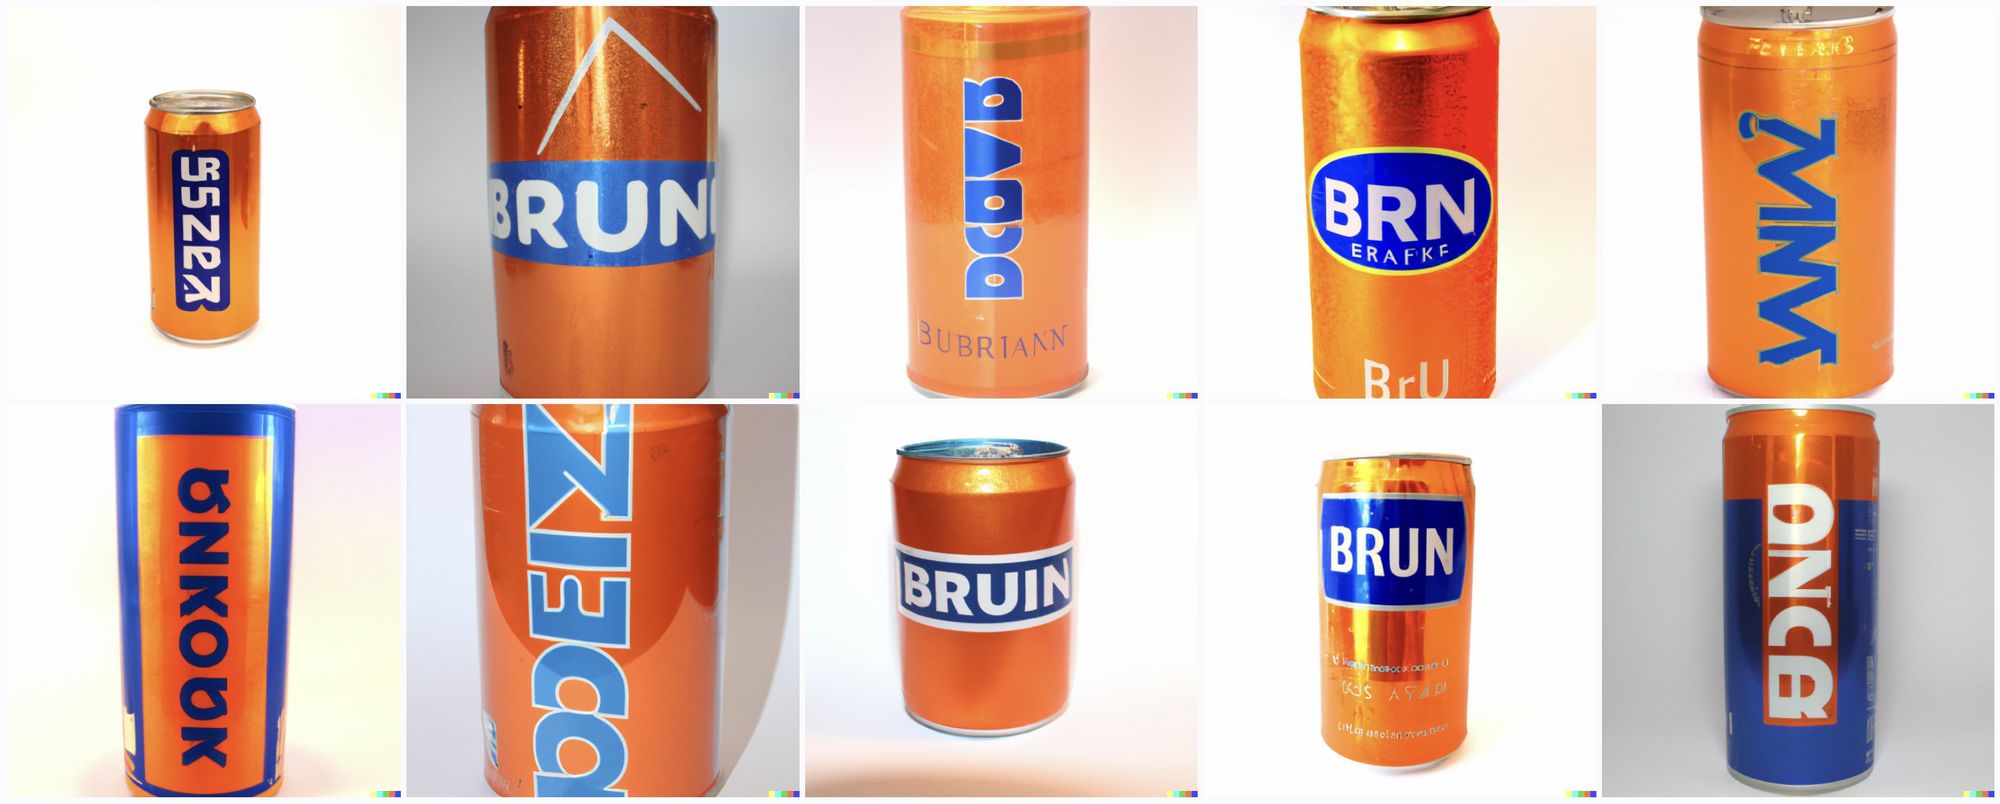 Tall soda cans, orange with bright blue lettering. This is the color scheme of Irn Bru. But the letters all read "BRN" or "Brun" or "Bruin" or other completely illegible characters.